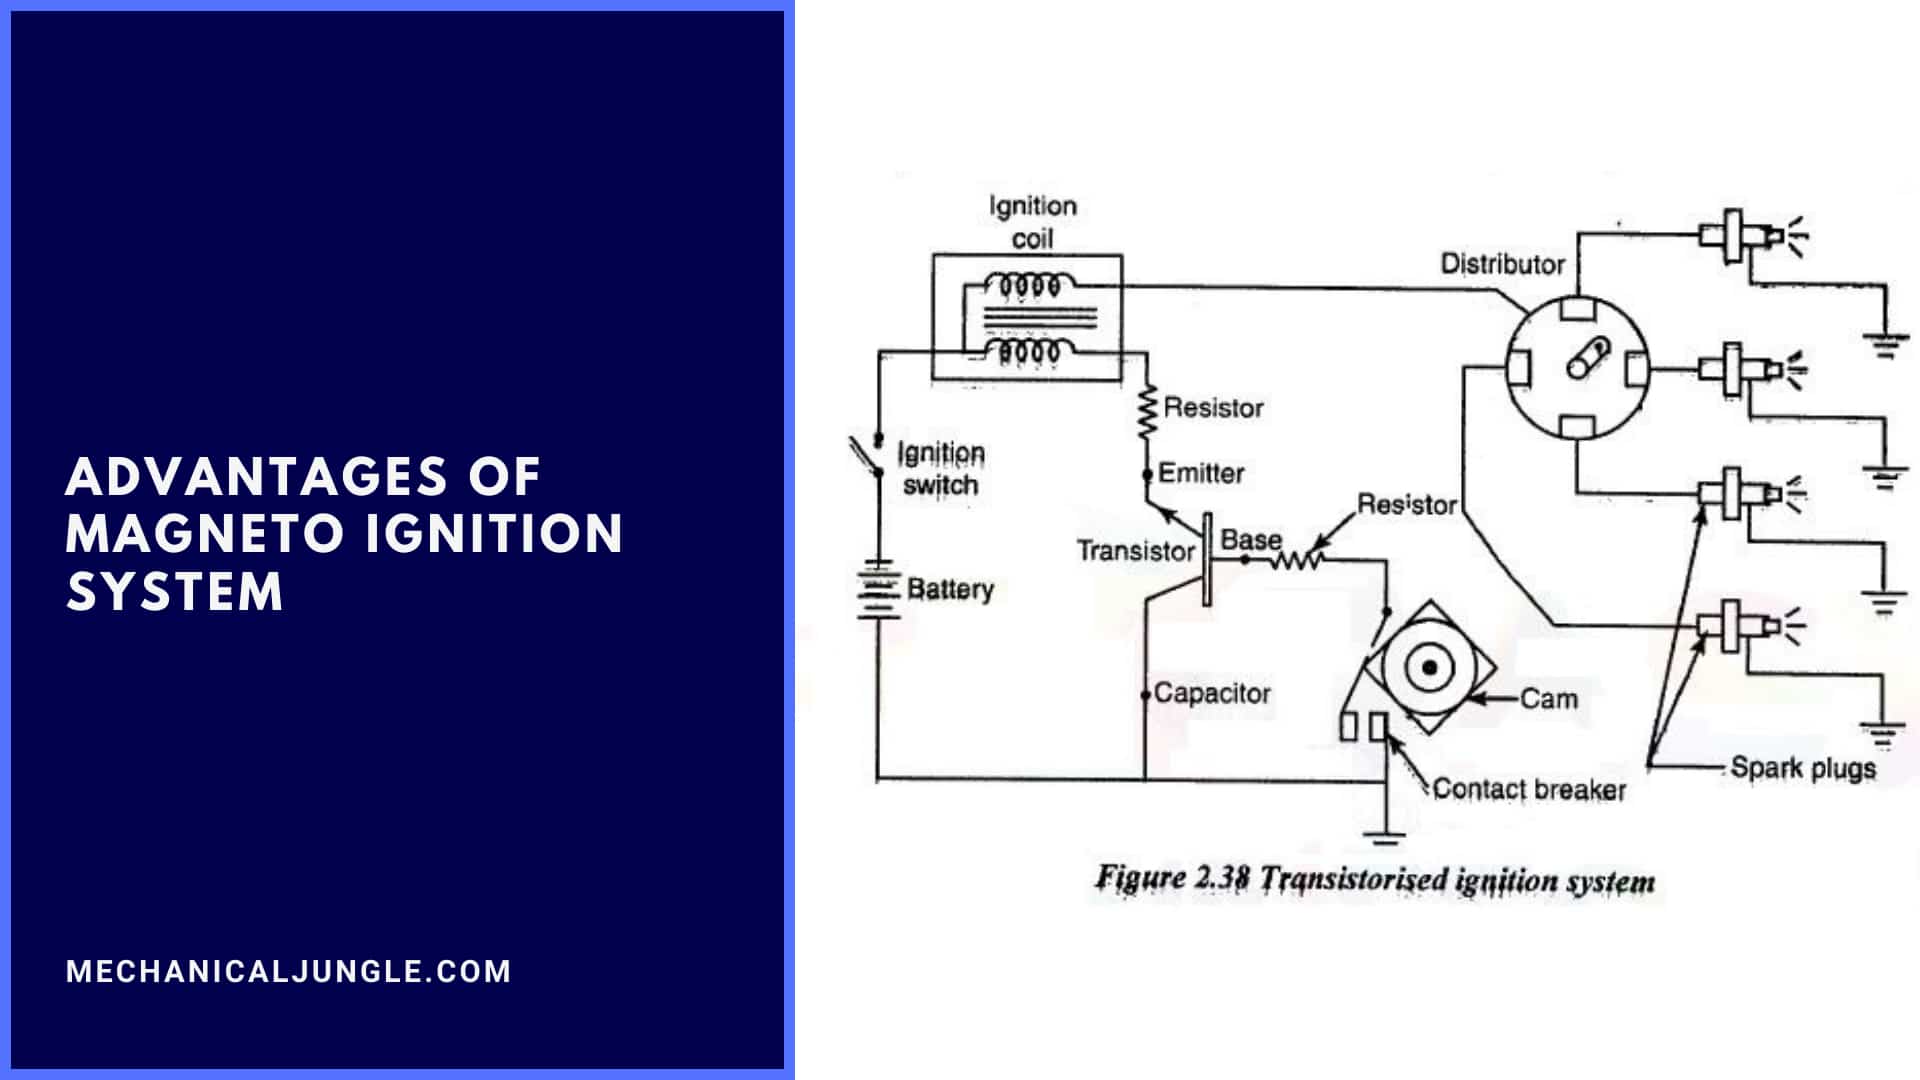 Advantages of Magneto Ignition System